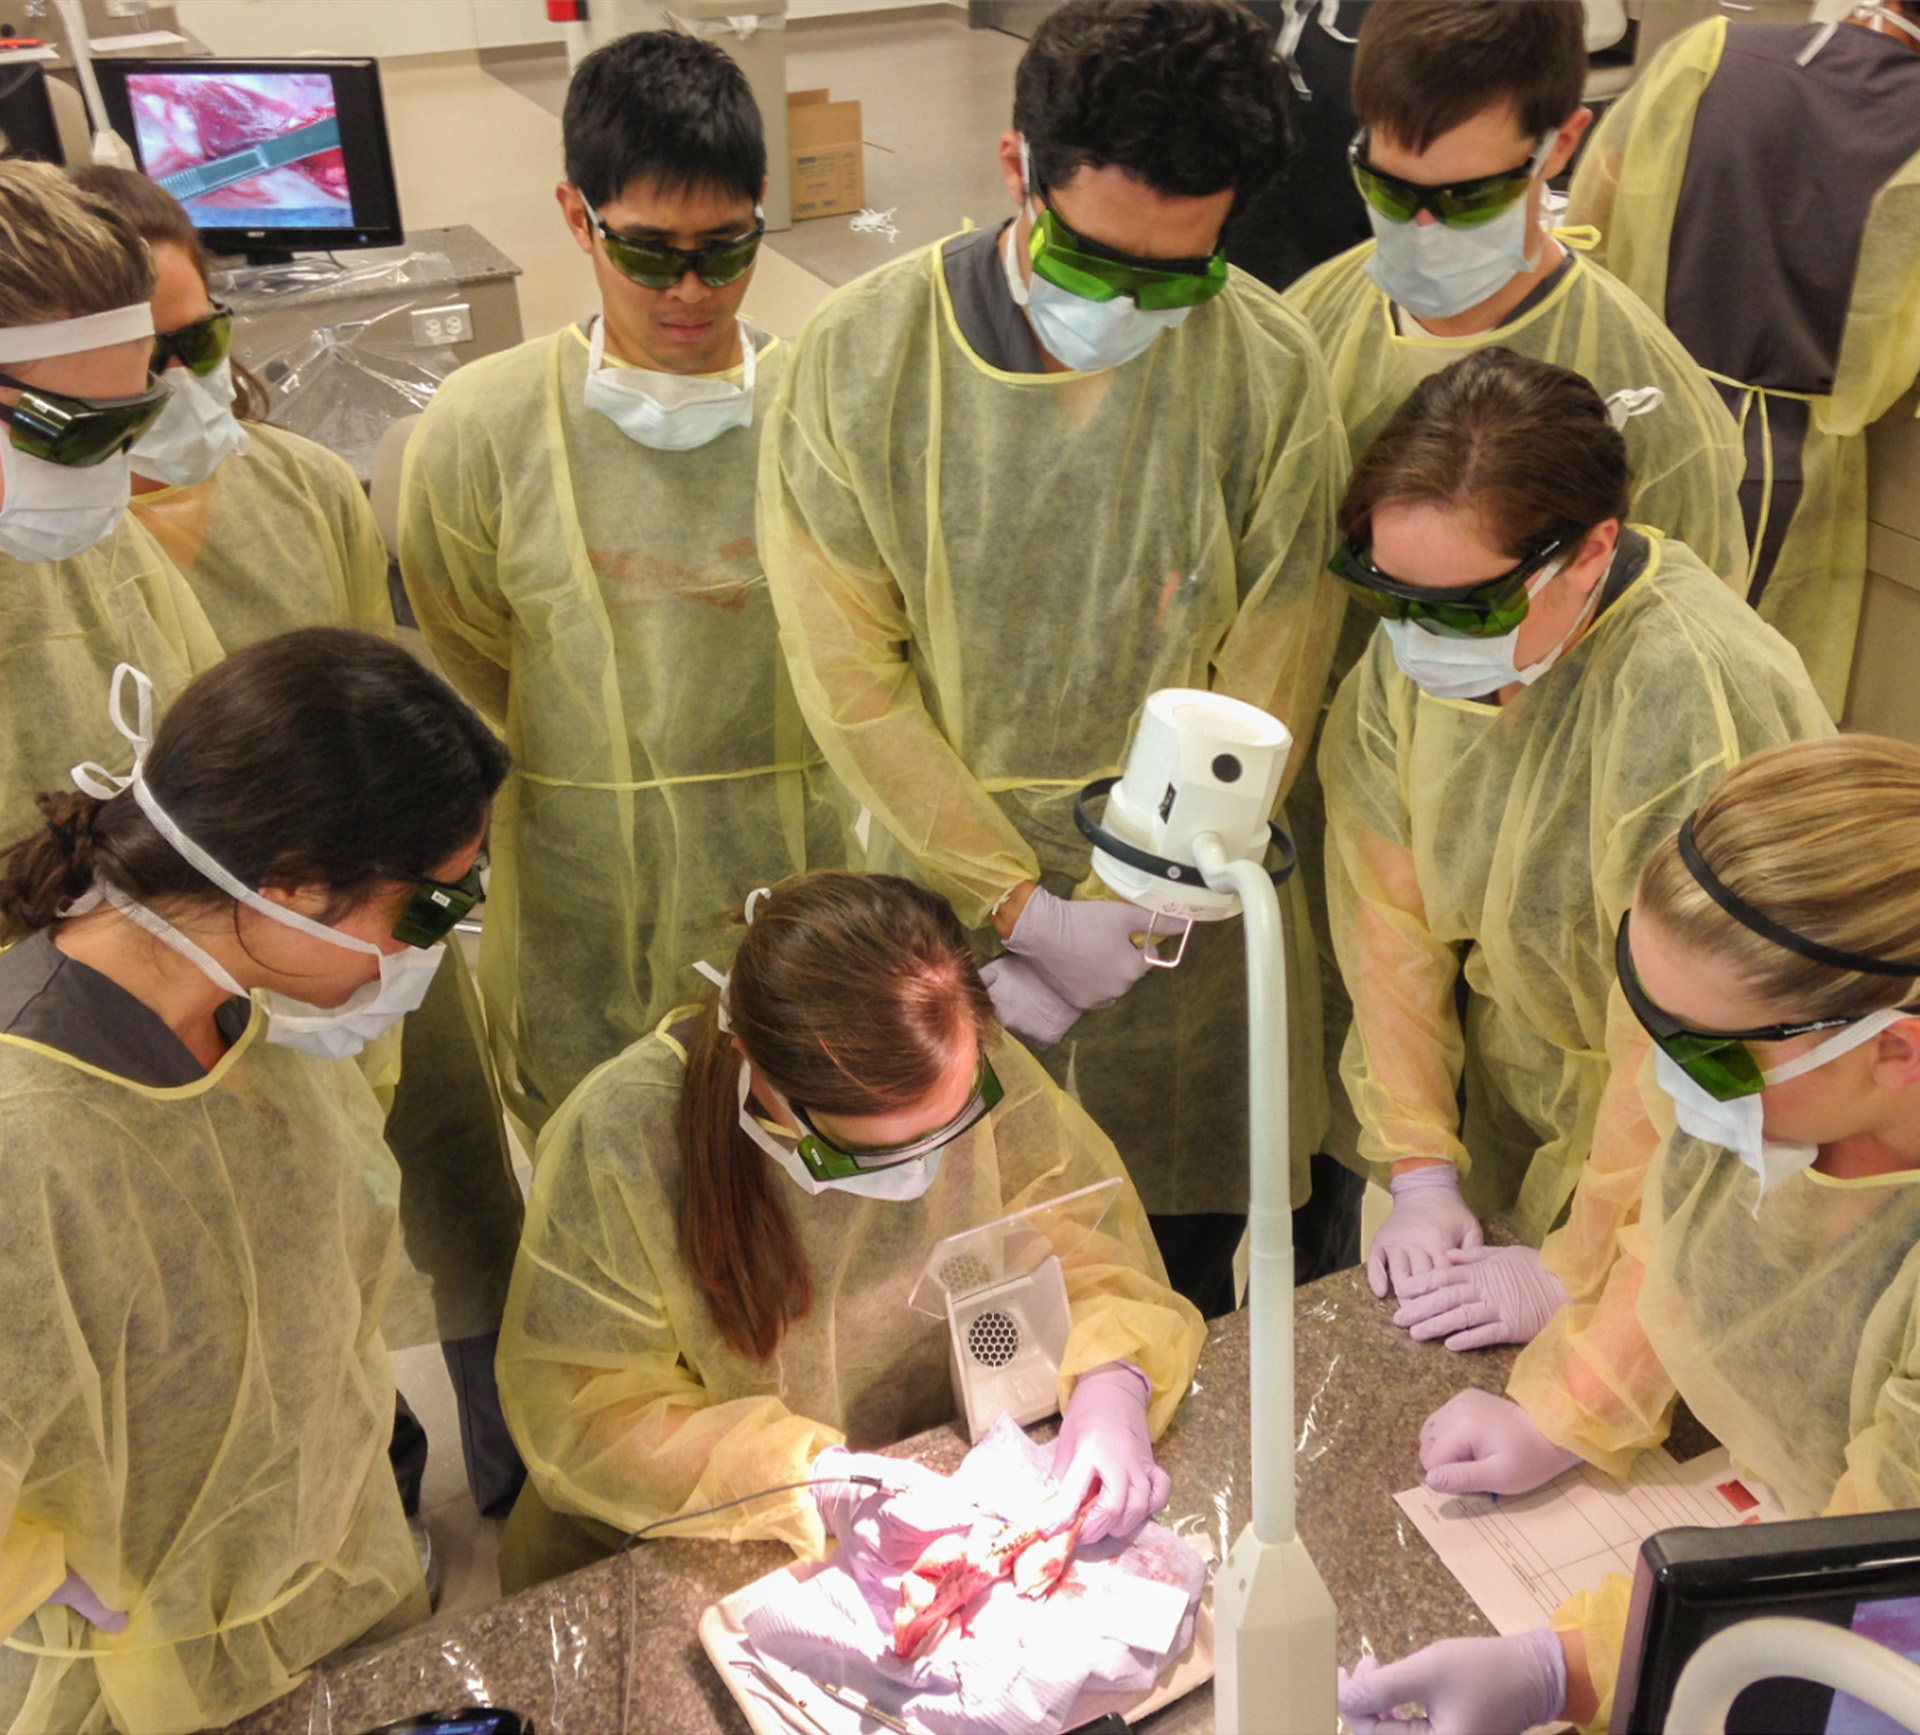 Students gather around a laser during their hands-on training. Lasers can be used to reduce pain and inflammation, improve healing, manage oral facial pain, and stimulate saliva flow and nerve regeneration.